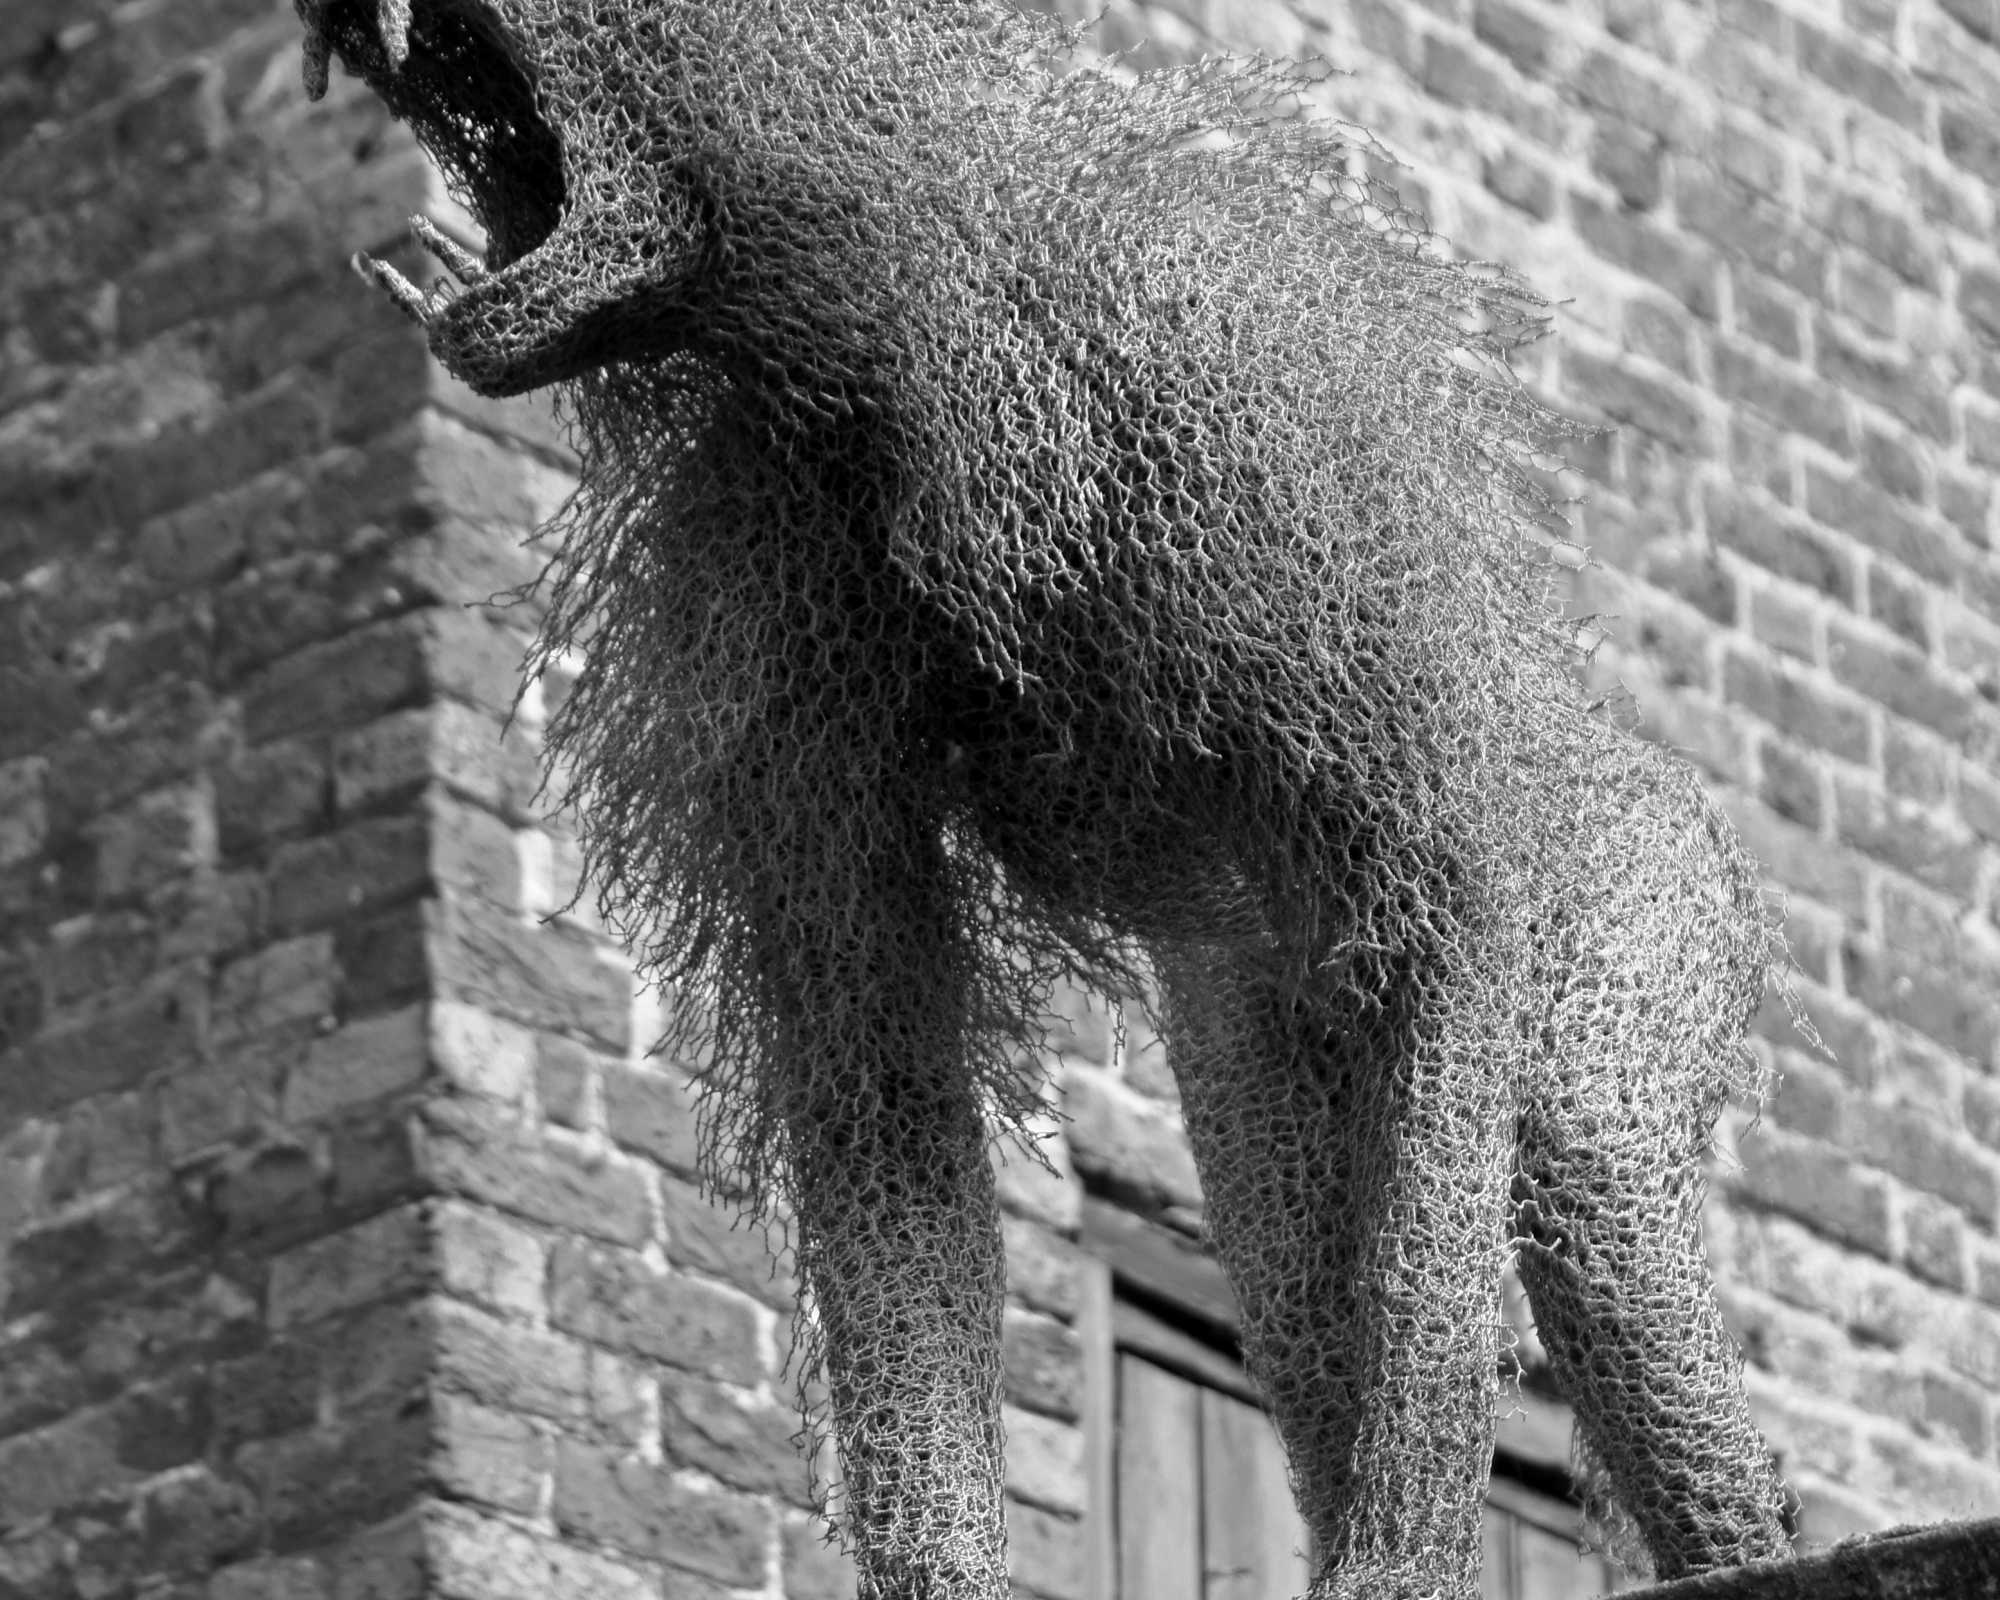 Monkey at the Tower of London